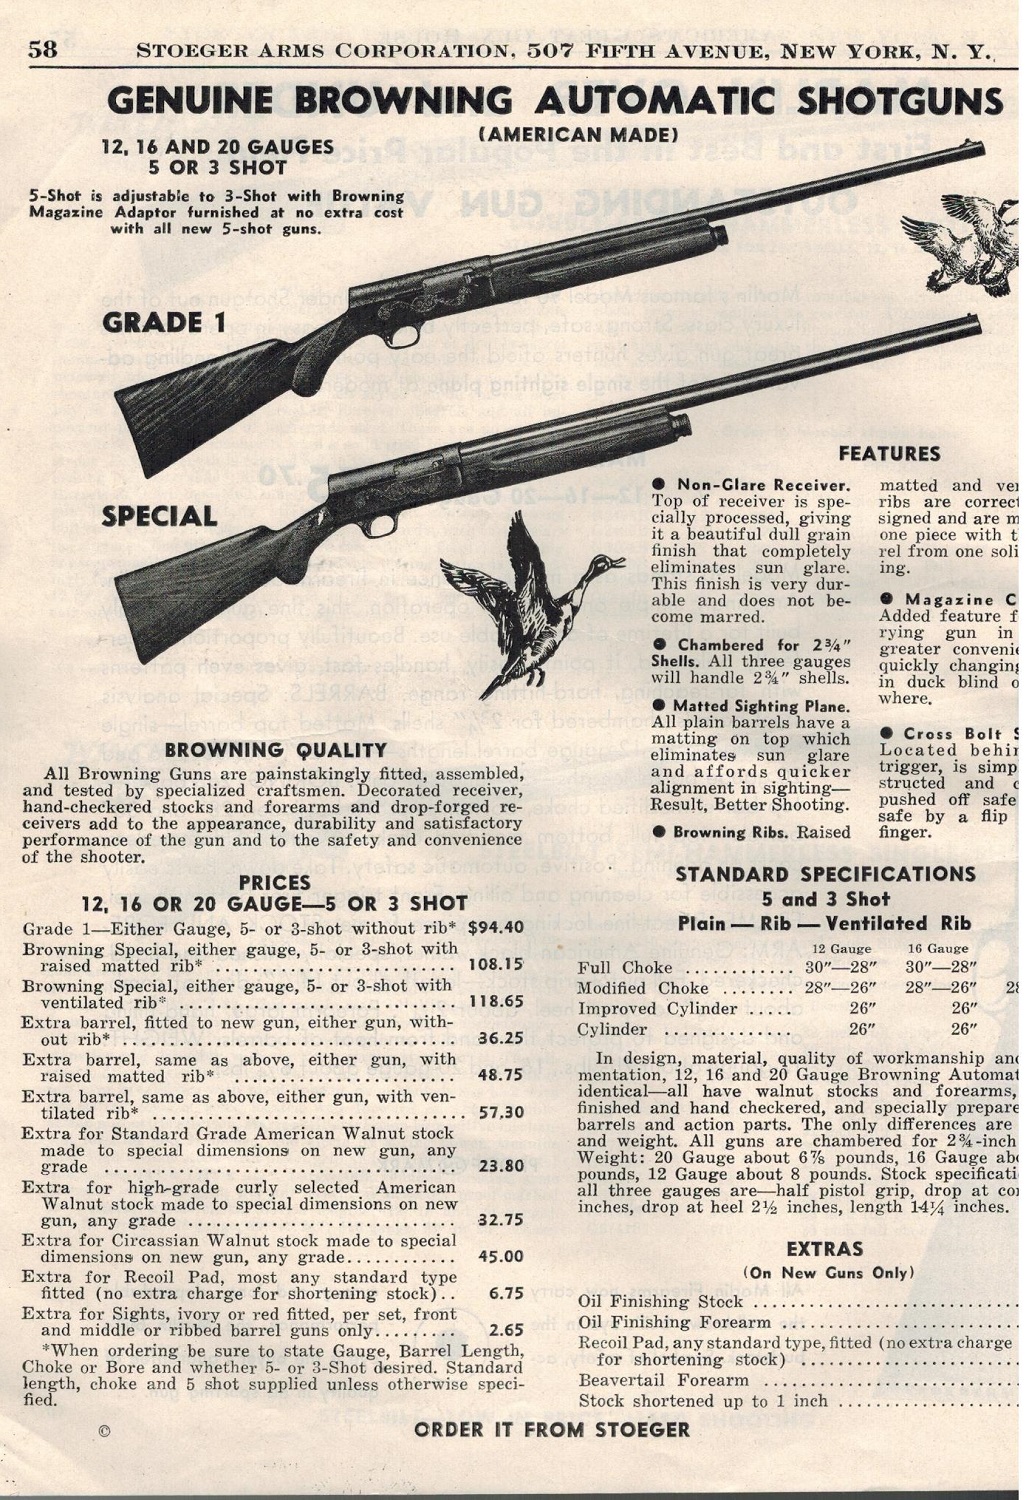 American Browning, 1948 Stoeger page 58.jpeg